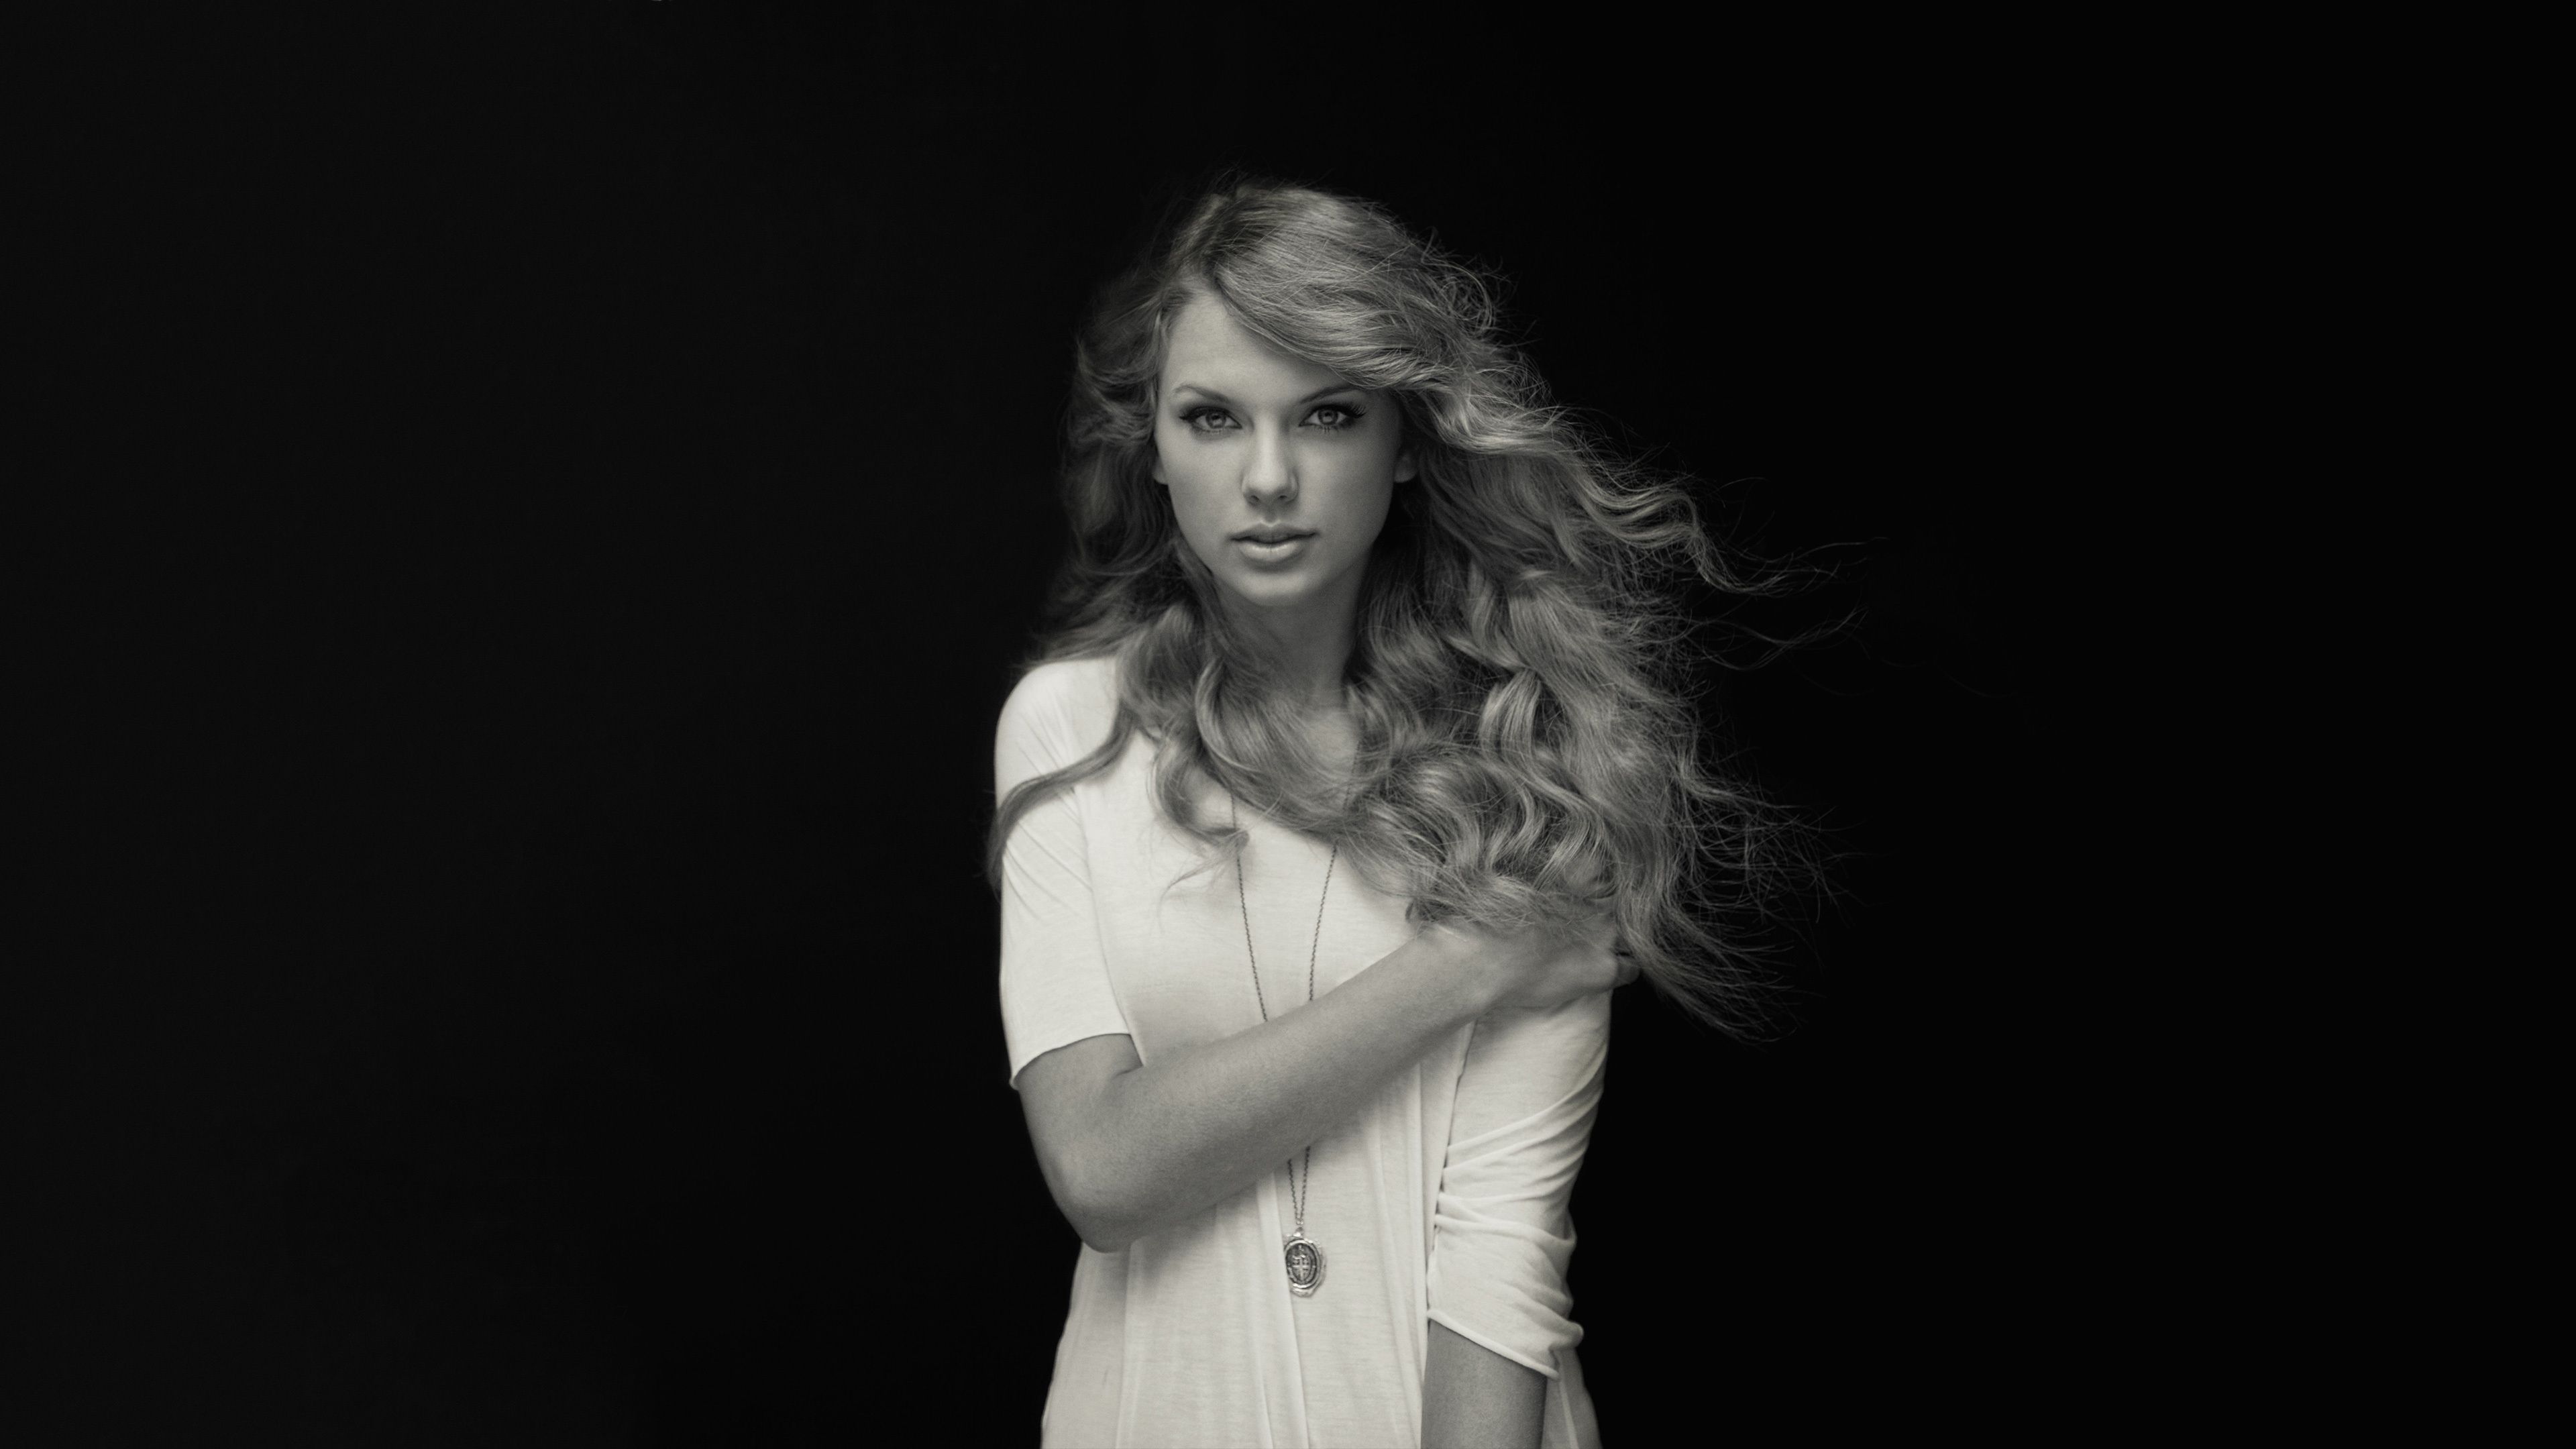 Download 3840x2400 wallpaper taylor swift, curly hair, black and white, 4k, ultra HD 16: widescreen, 3840x2400 HD image, background, 4717